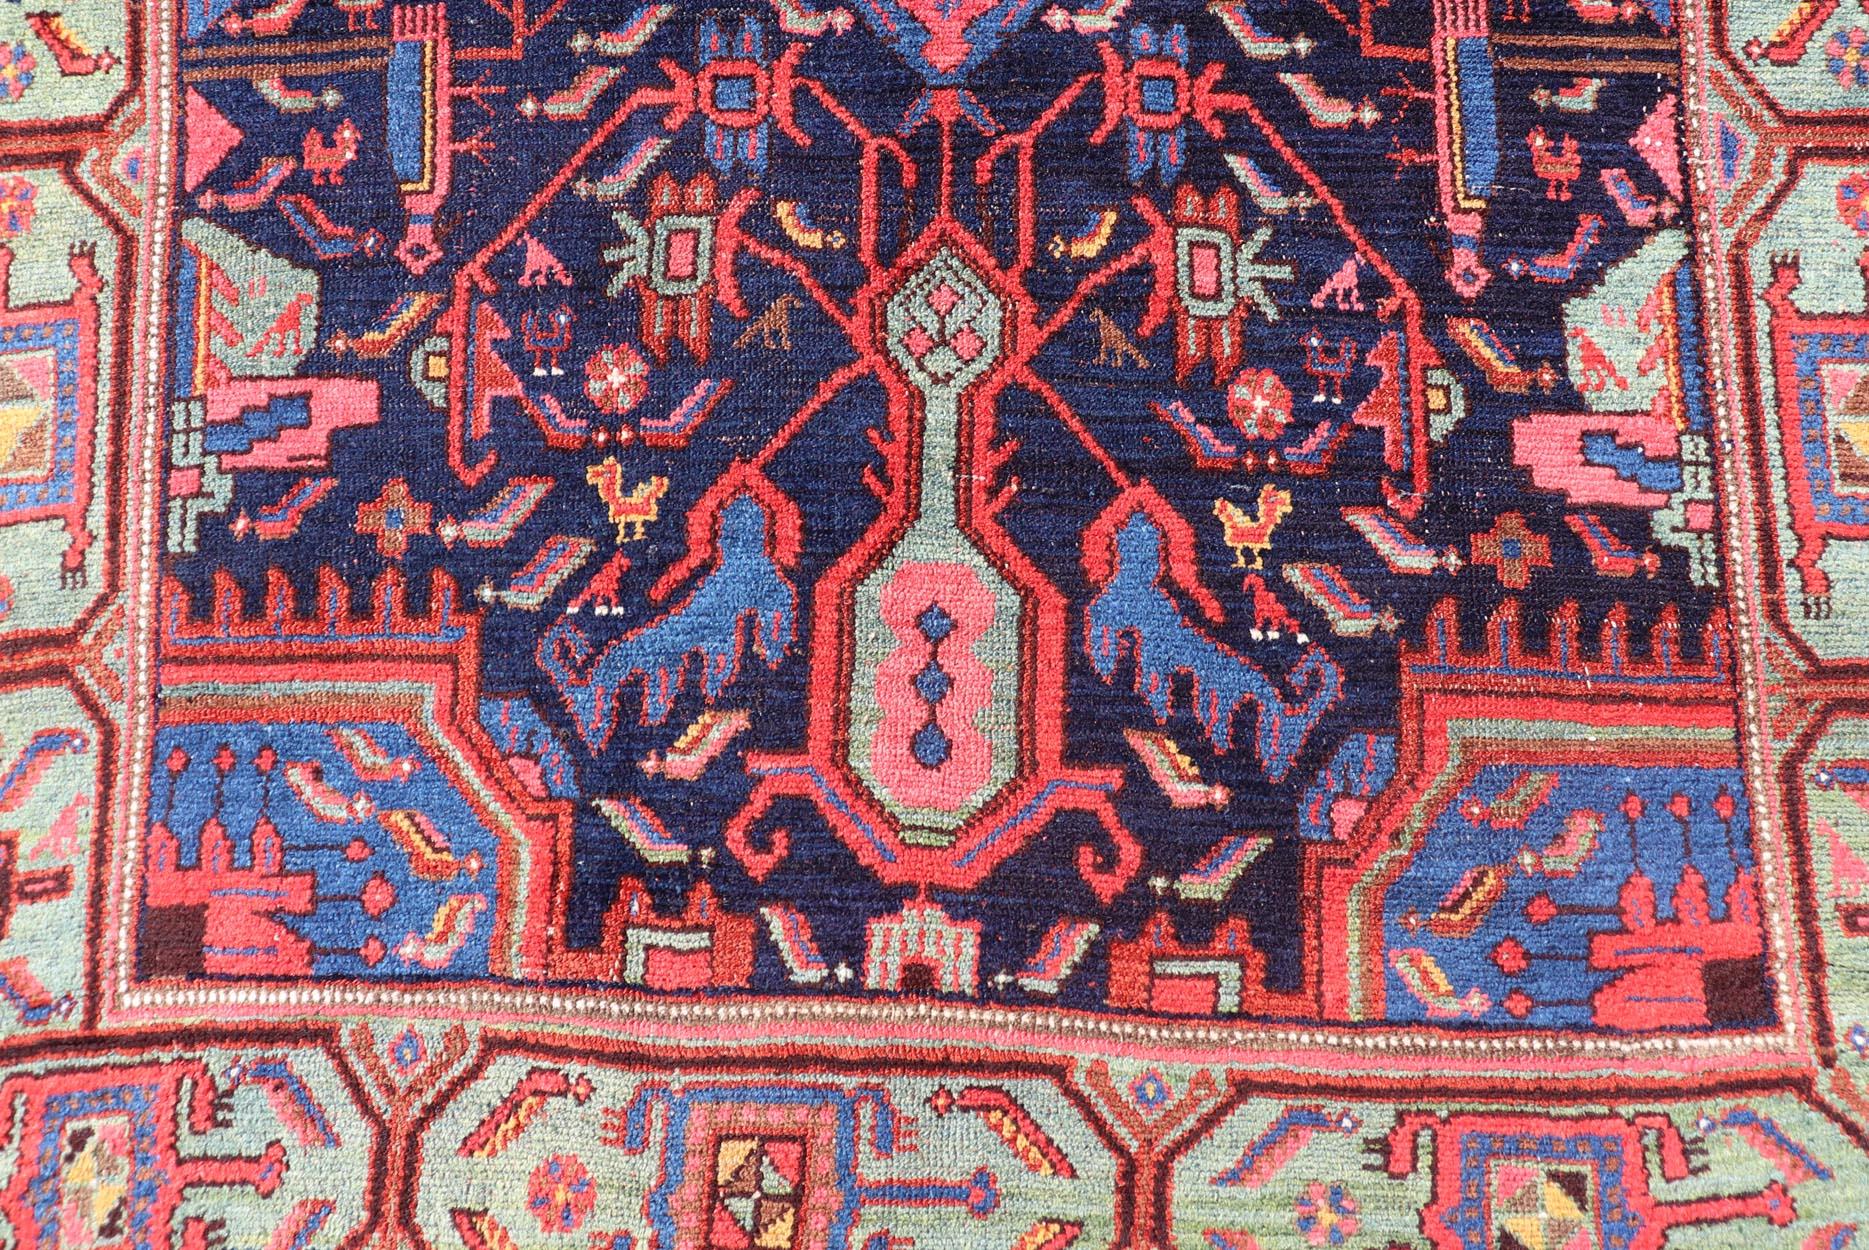 N.W. Persian Rug with Geometric Florals in Red, Ivory, Cream, Blue and Green. Keivan Woven Arts / EMB-8523-178684, country of origin / type: Iran / N.W. Persian, circa 1900.
This early 20th century antique Northwest Persian rug features field